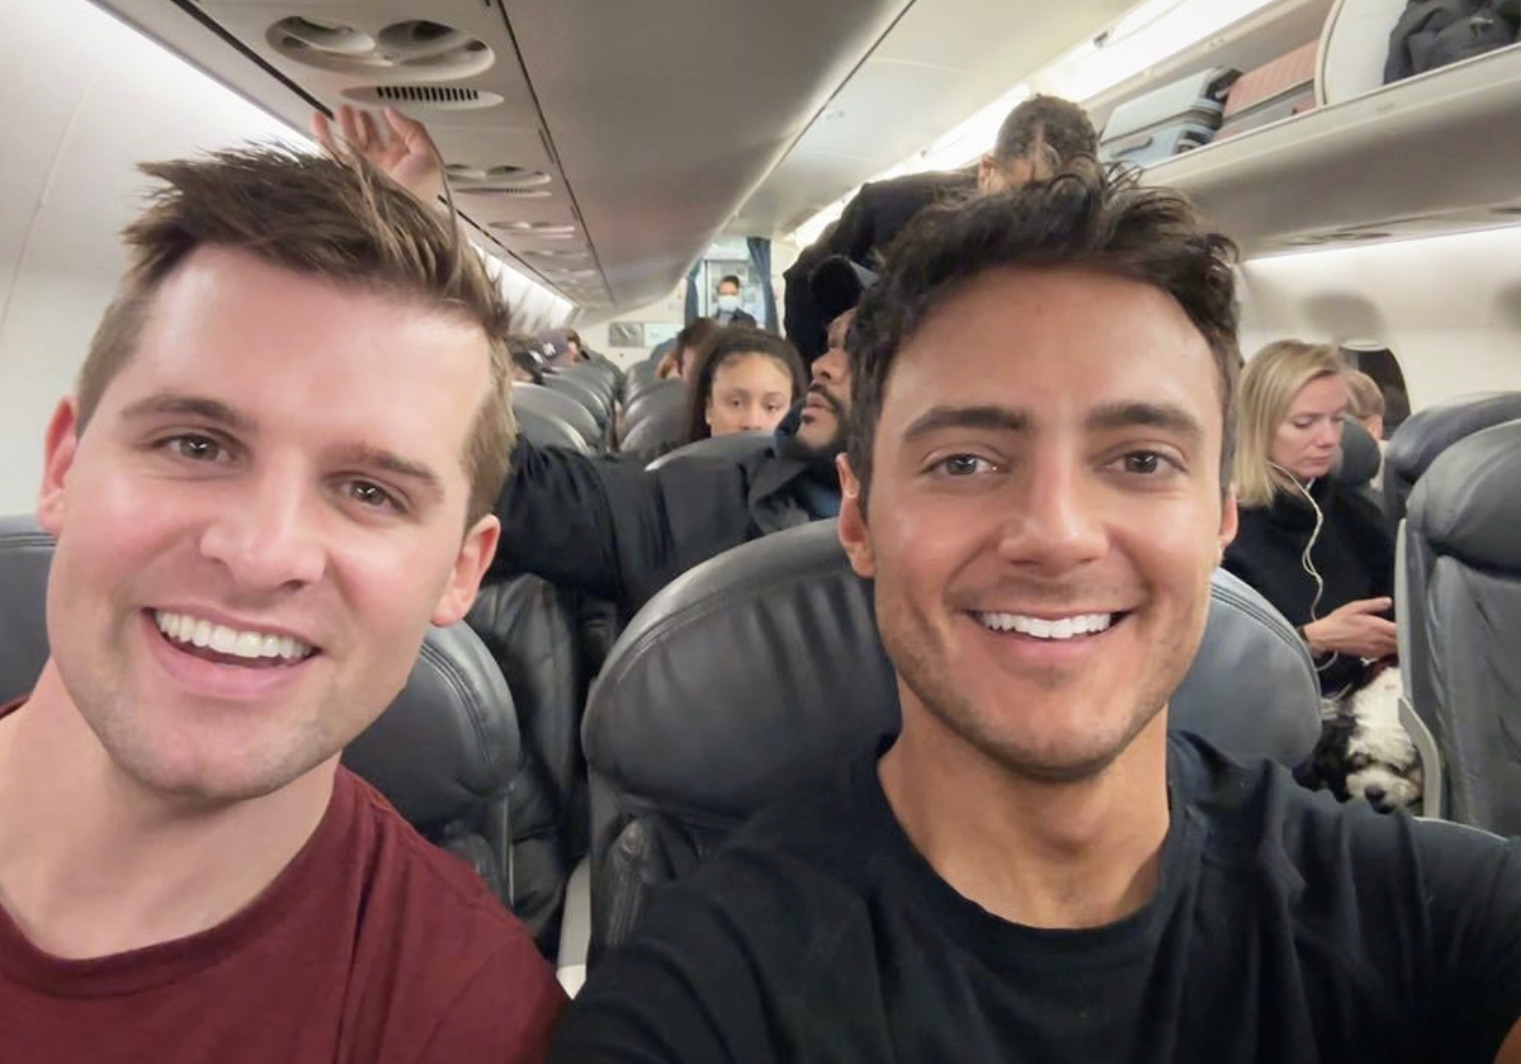 Southwest Airlines Cancels More Flights, Gay Couple Documents Journey Back to NYC